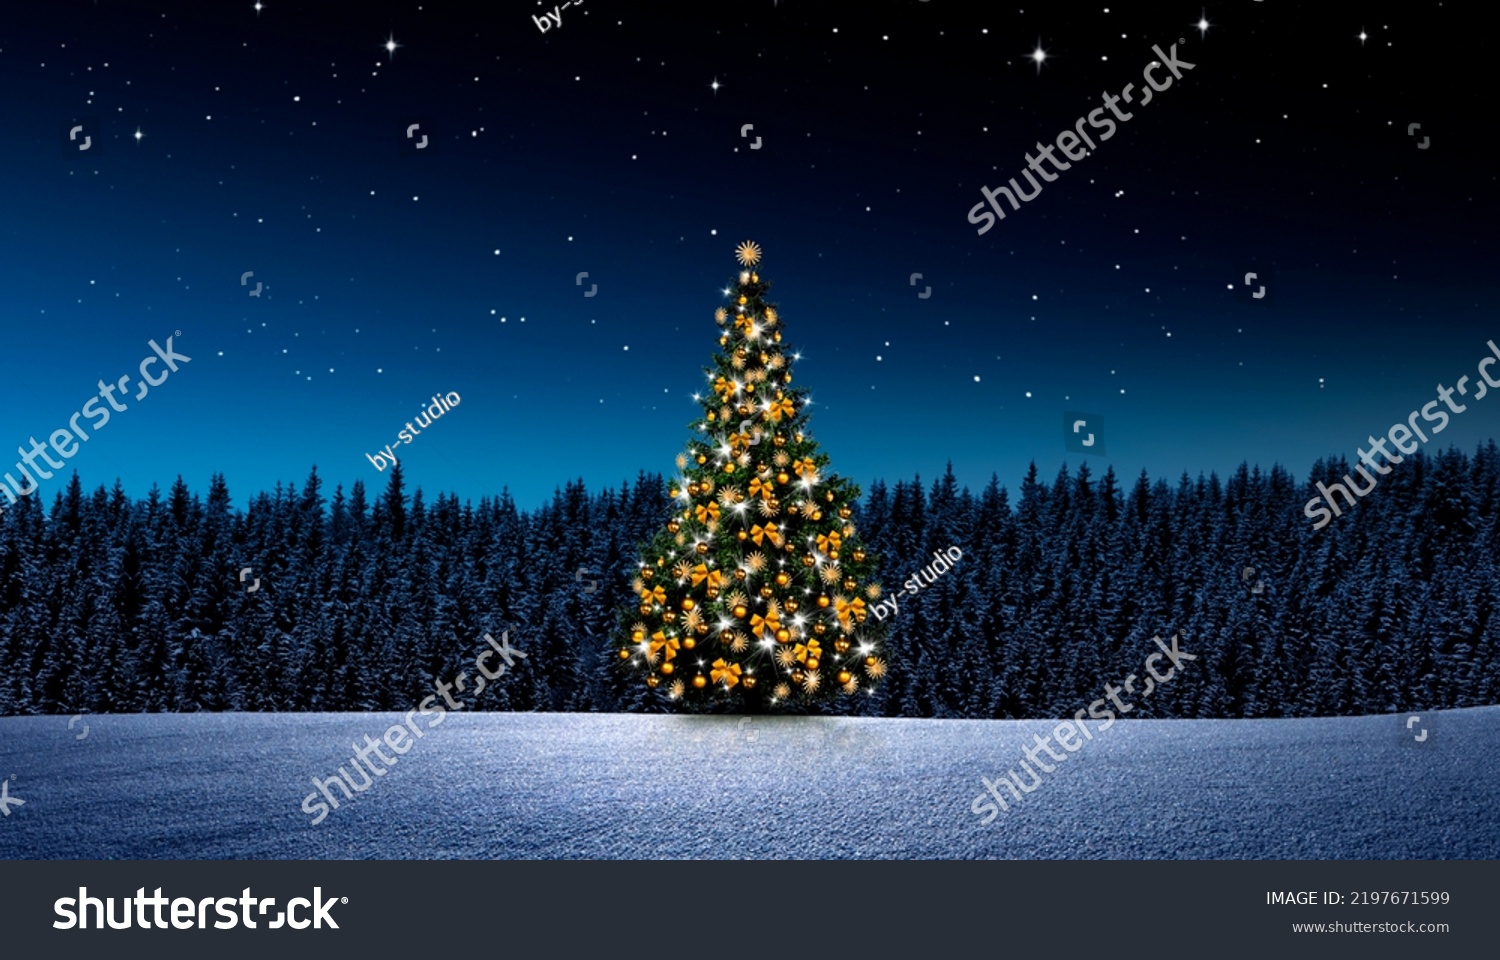 Christmas tree at night in winter #2197671599